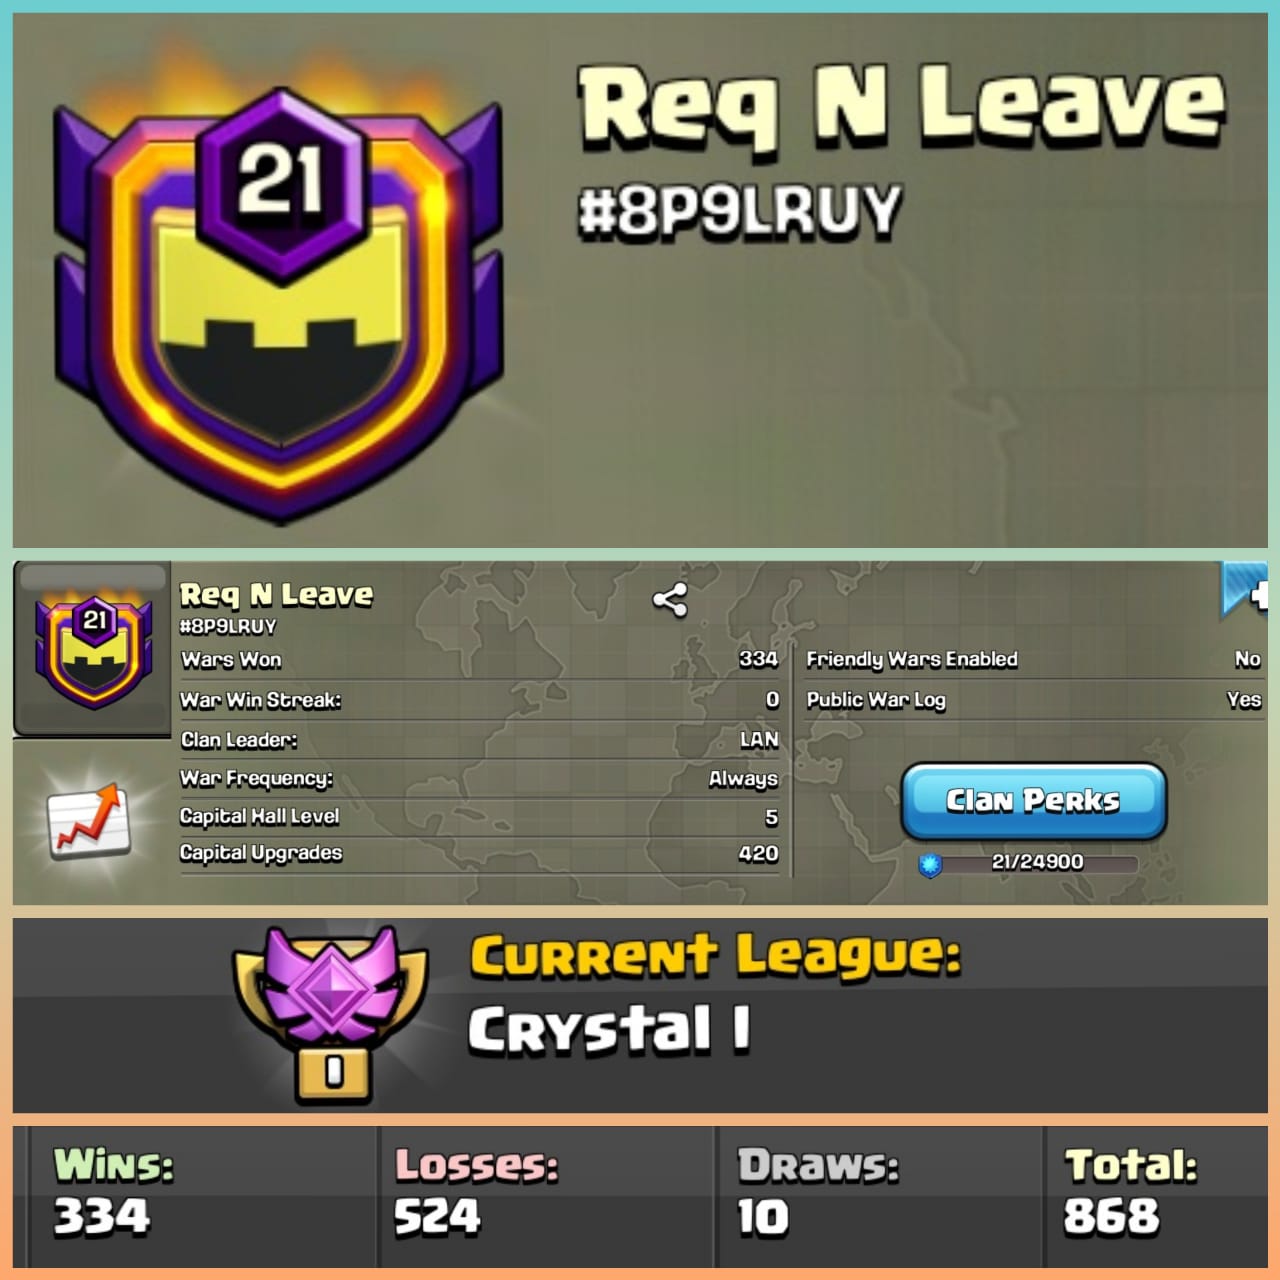 NAME- Req N Leave  - LEVEL-21 -  CRYSTAL-1 - W-334 - L- 524 - CLAN CAPITAL-5 - IOS/ANDROID